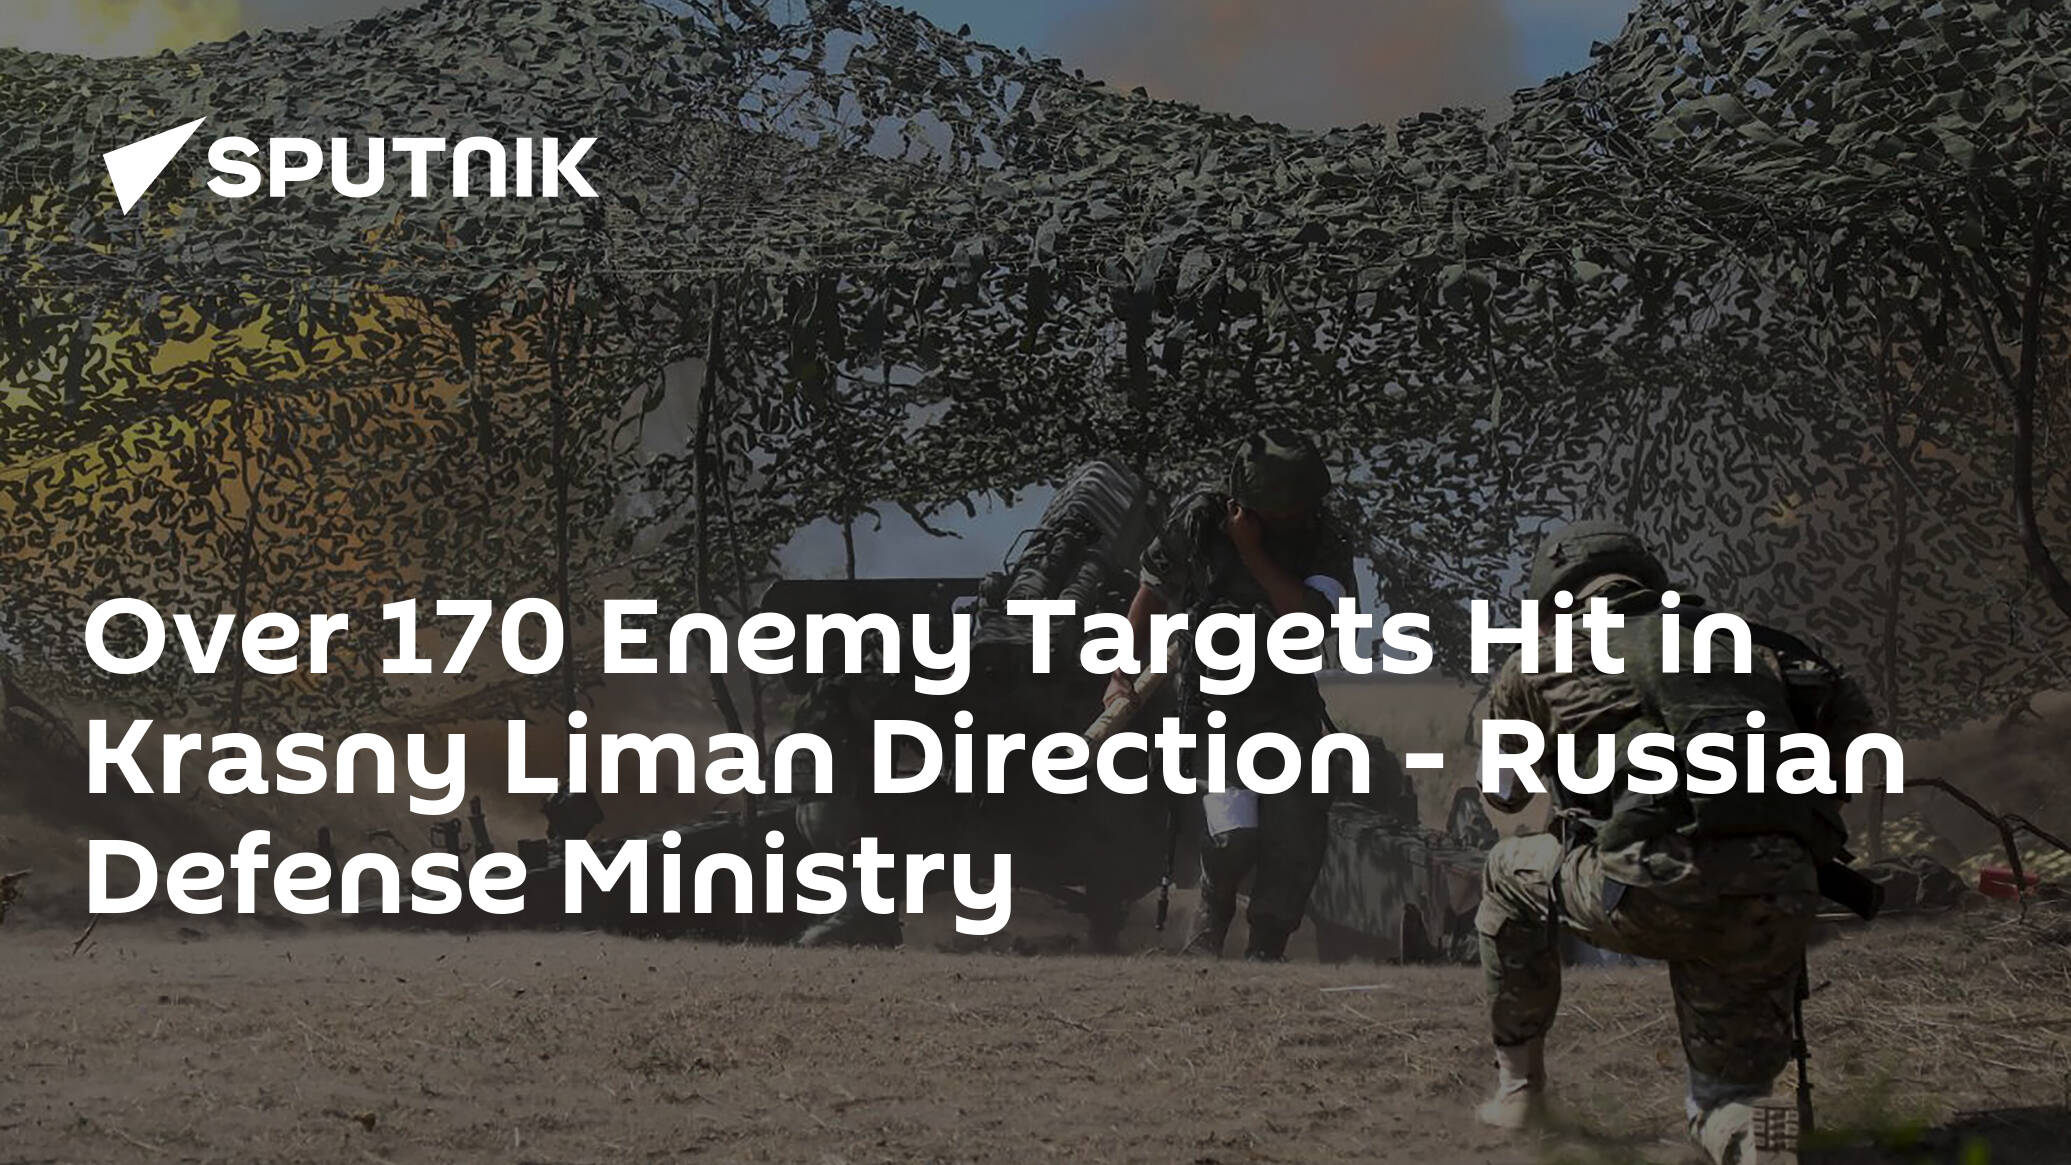 Over 170 Enemy Targets Hit in Krasny Liman Direction – Russian Defense Ministry